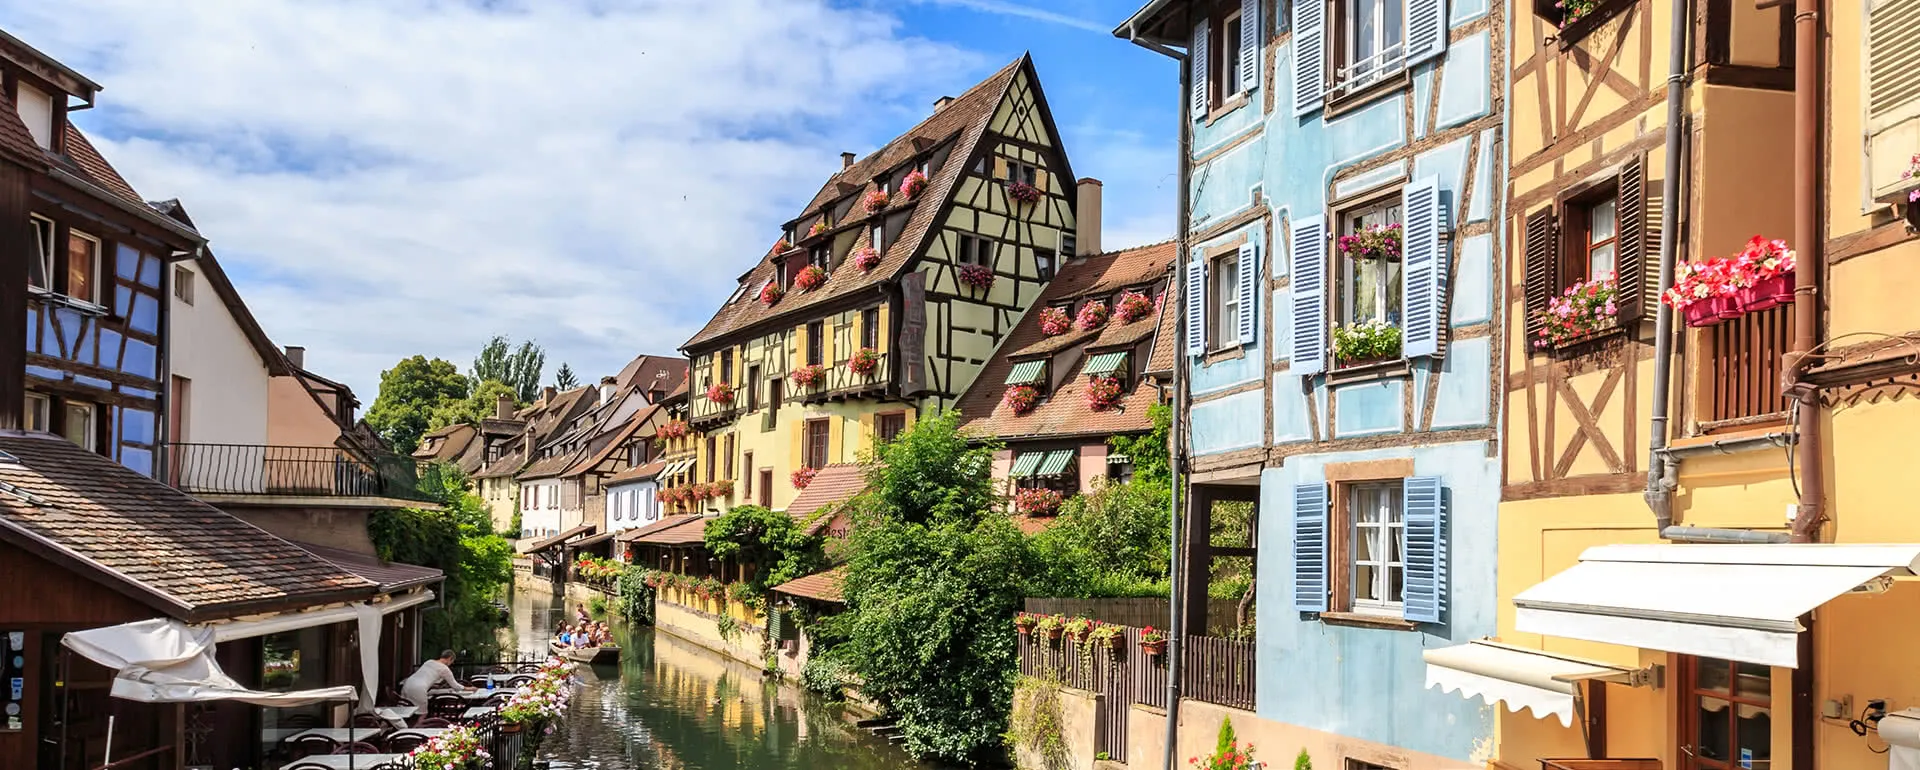 Meeting and conference location Colmar